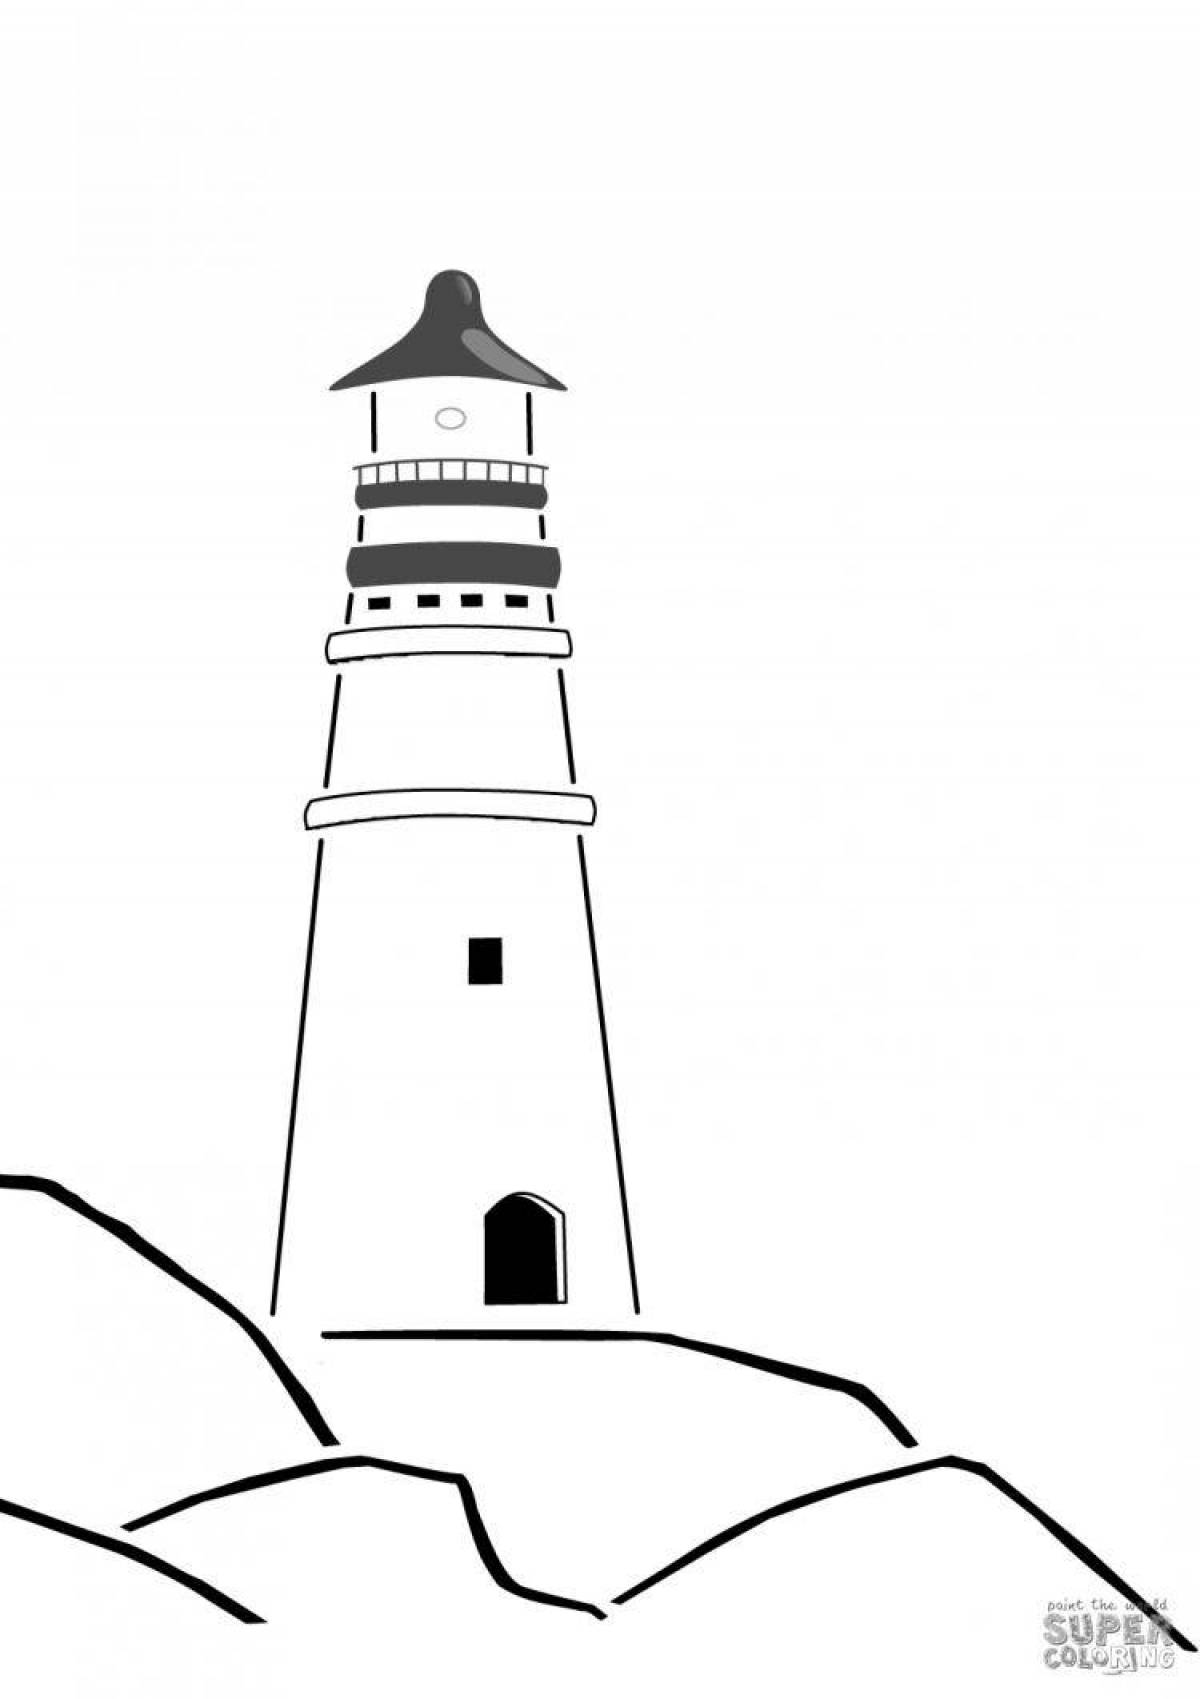 Fun lighthouse coloring book for kids